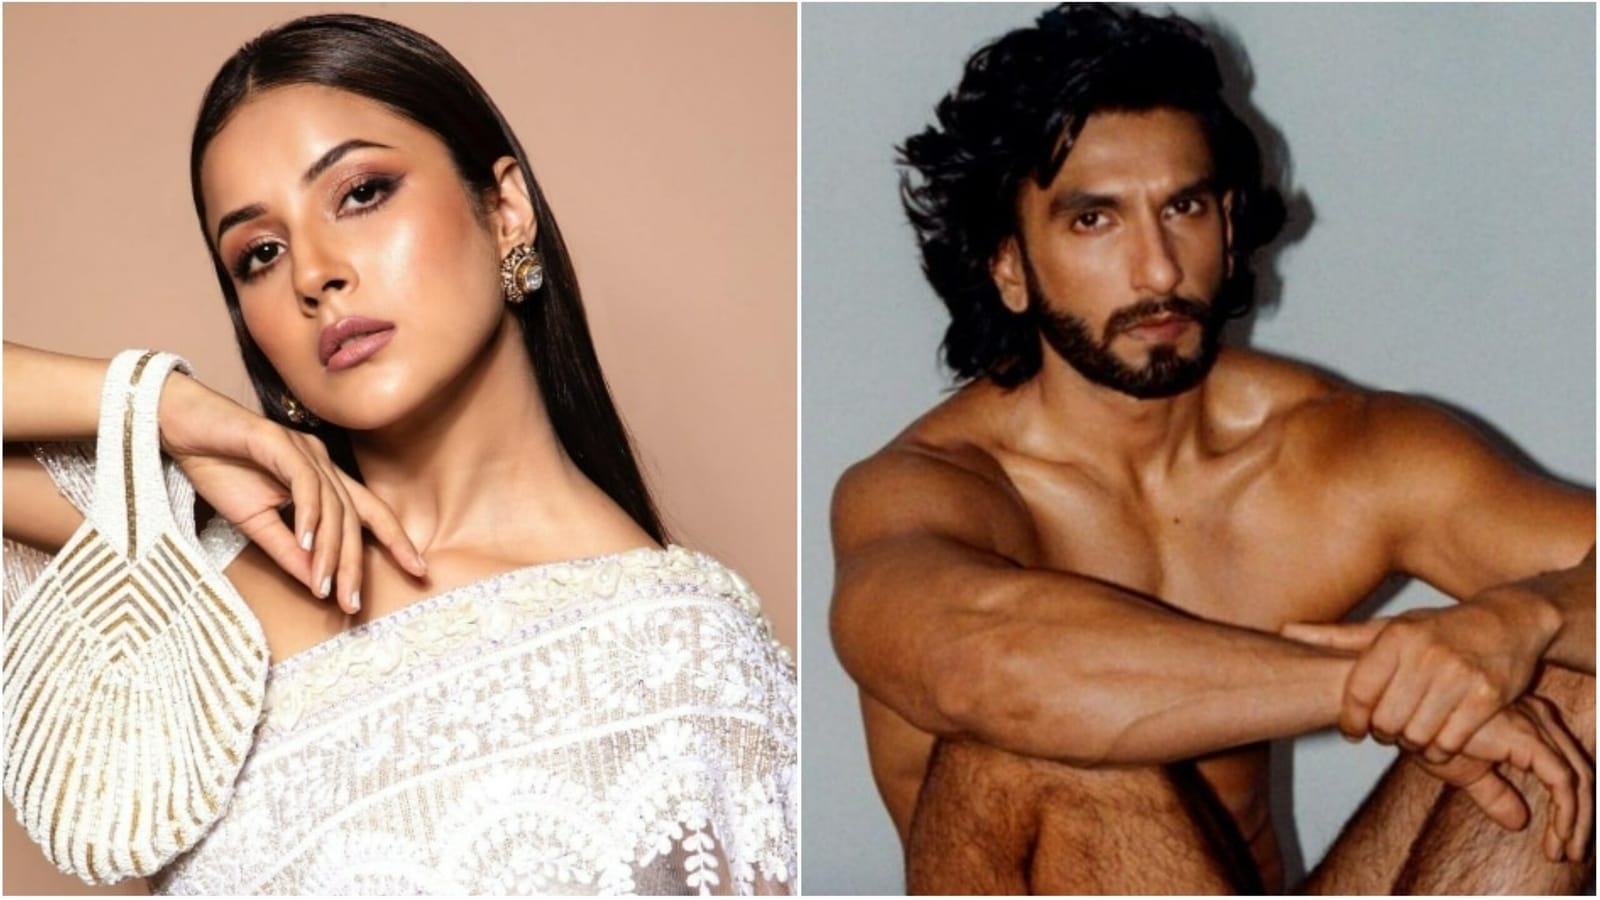 Shehnaaz Gill blushes as she reveals her interesting reaction to Ranveer Singh’s nude pics